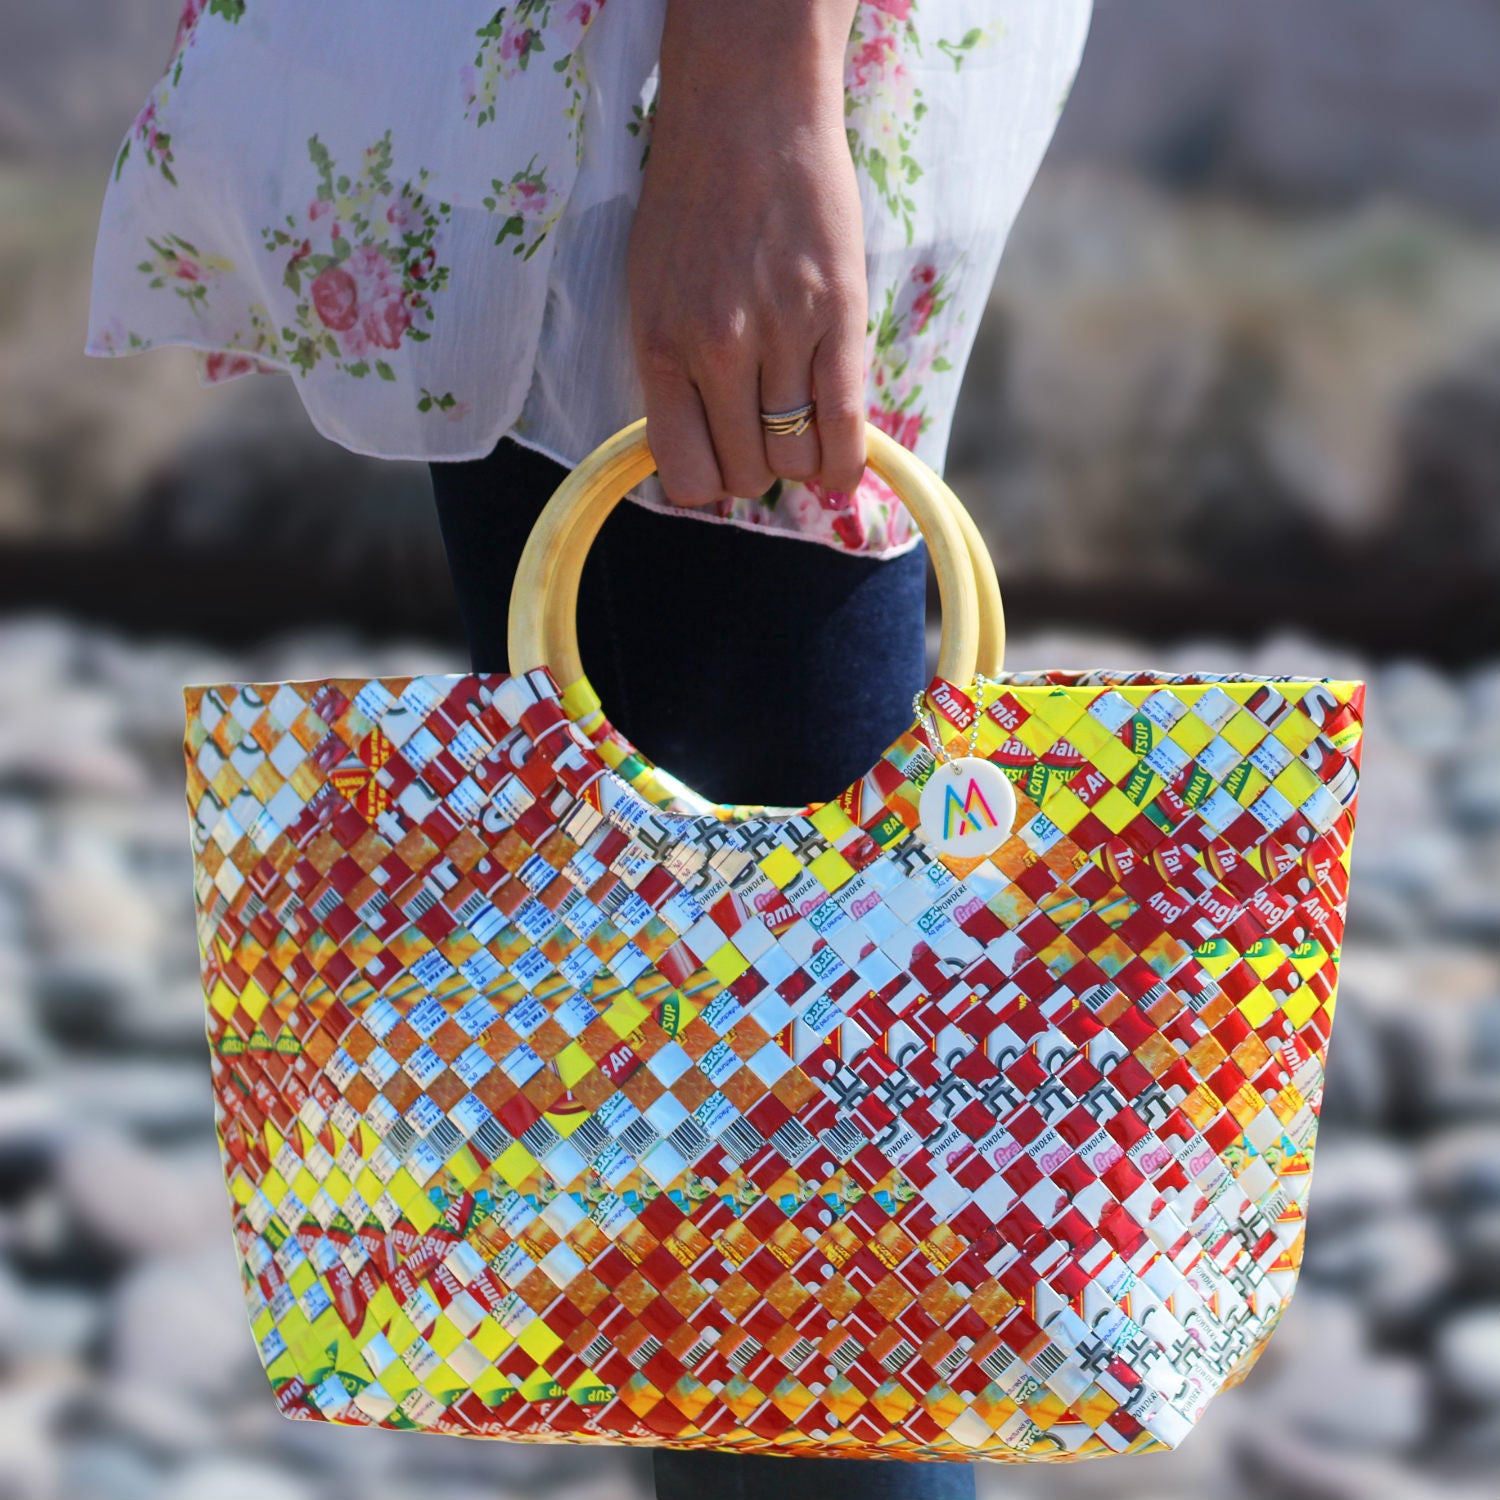 Eco-friendly, Colorful Handbag From Recycled Materials